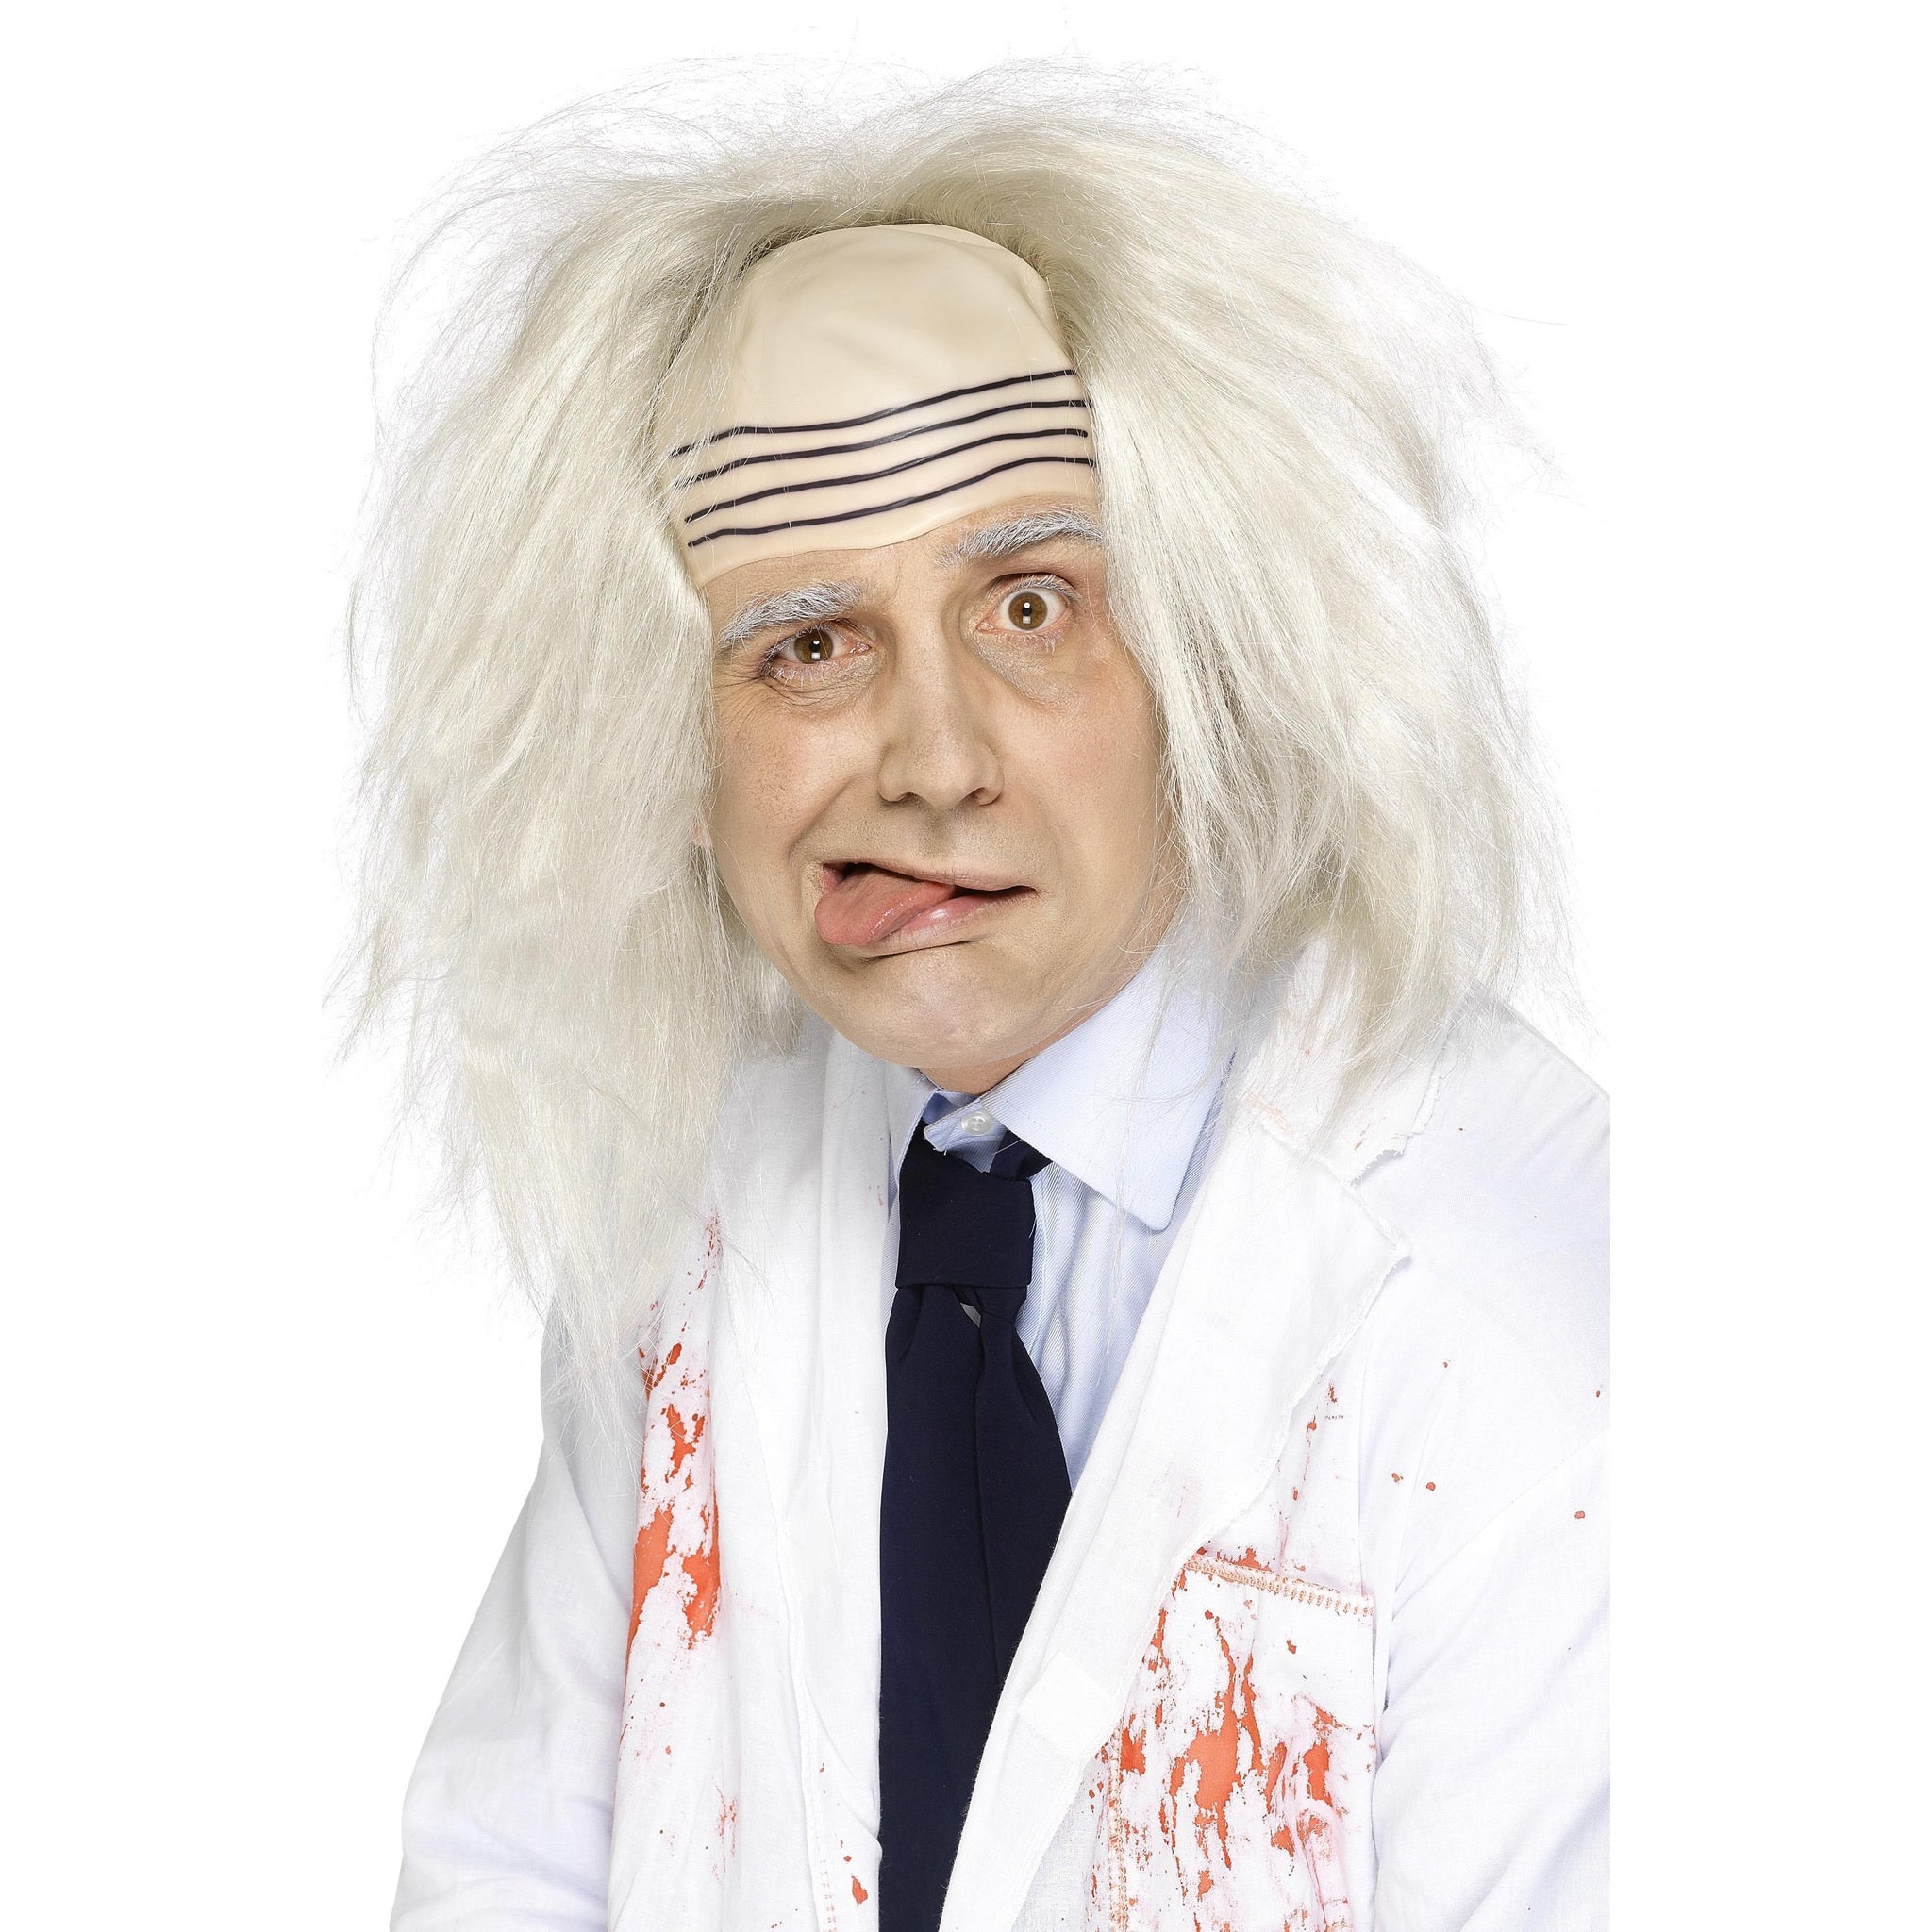 Crazy scientist or madman white wig with wrinkled forehead